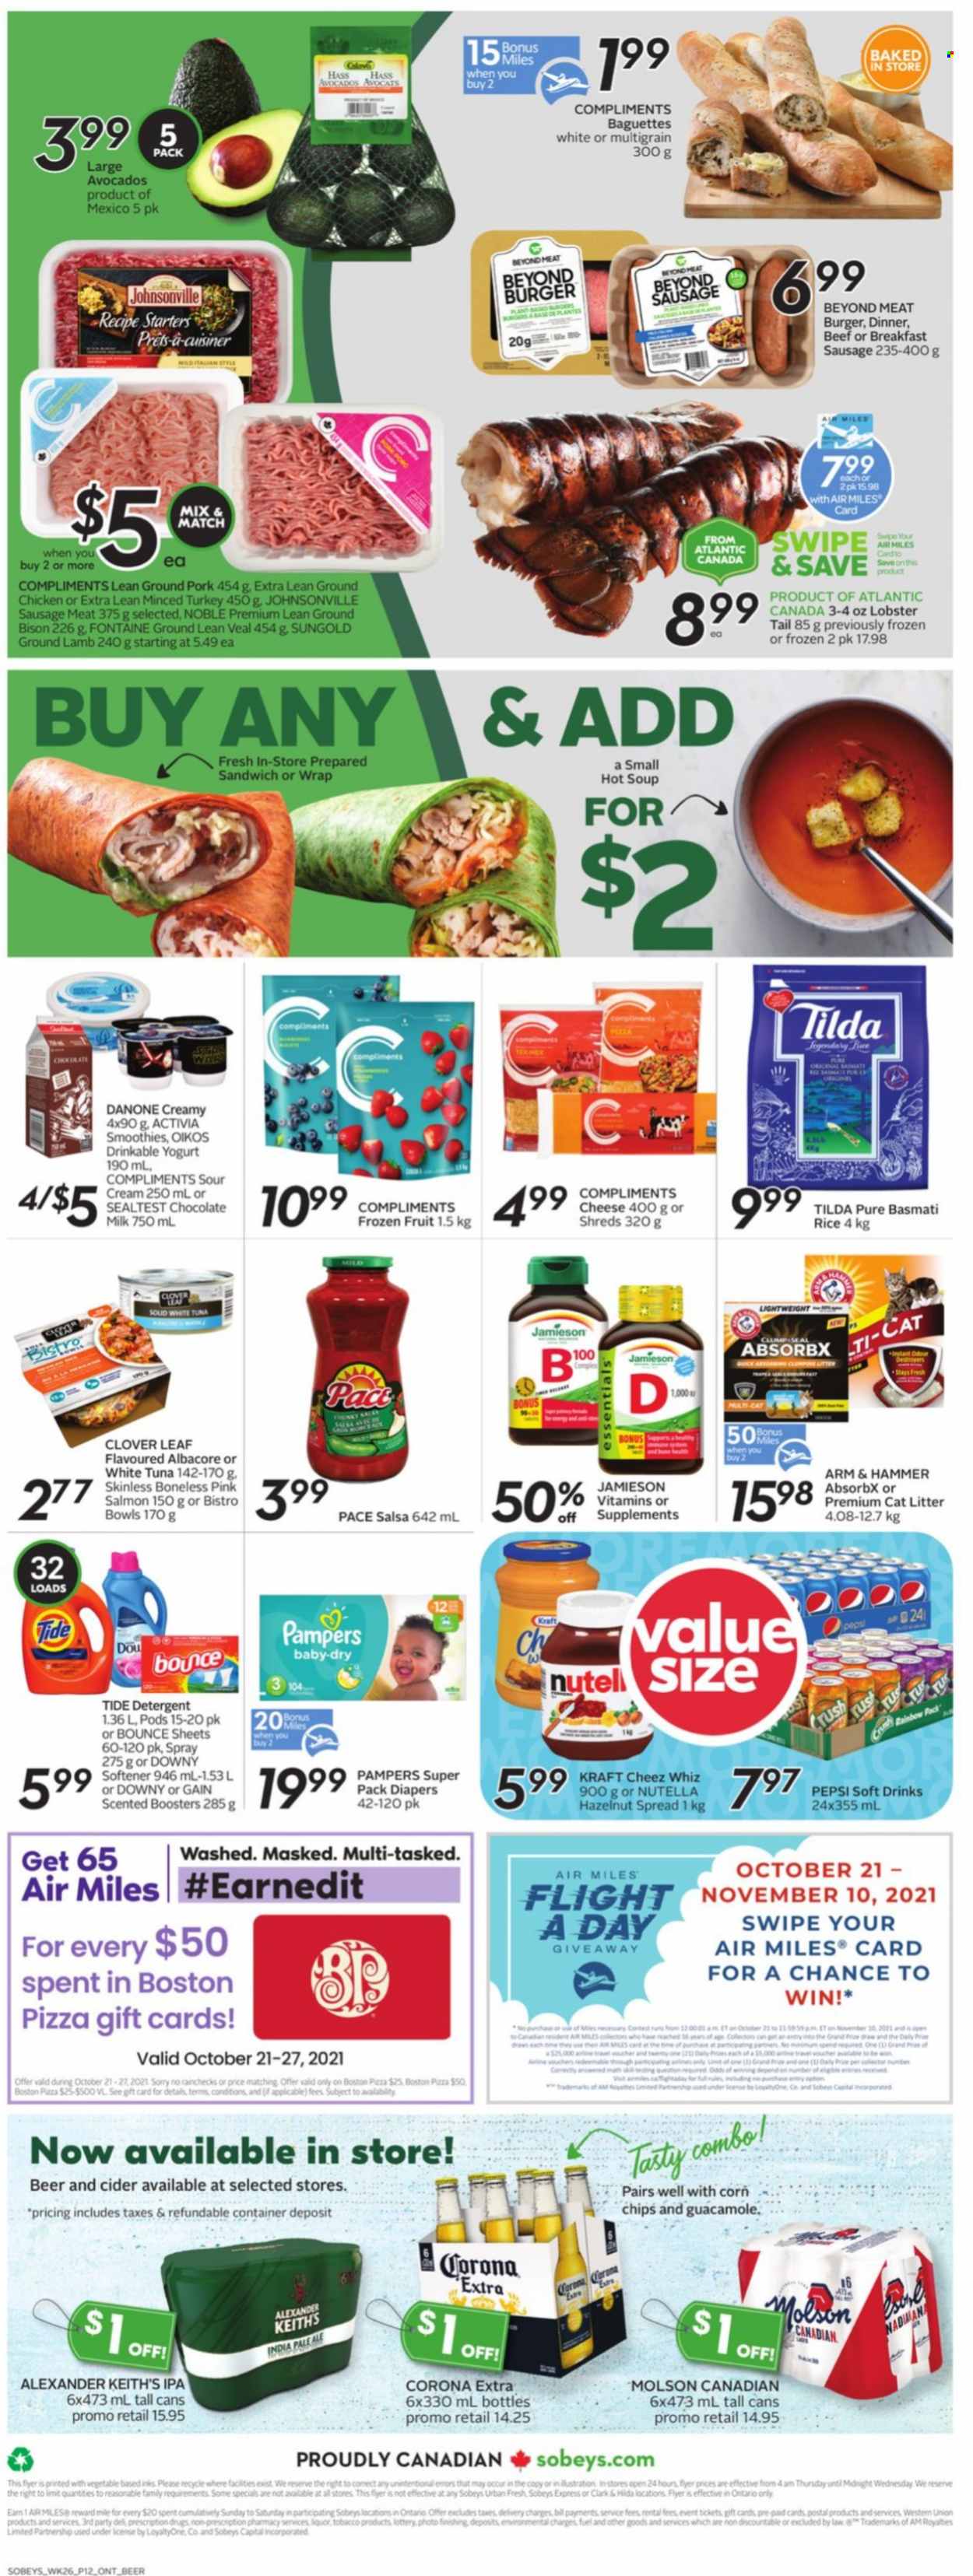 thumbnail - Sobeys Flyer - October 21, 2021 - October 27, 2021 - Sales products - corn, lobster, salmon, tuna, lobster tail, soup, hamburger, Kraft®, Johnsonville, sausage, guacamole, yoghurt, Clover, Activia, Oikos, milk, sour cream, milk chocolate, chocolate, ARM & HAMMER, basmati rice, rice, salsa, hazelnut spread, Pepsi, soft drink, smoothie, cider, beer, Corona Extra, IPA, ground chicken, chicken, bison meat, ground lamb, ground pork, sausage meat, lamb meat, nappies, Gain, Tide, fabric softener, Bounce, Downy Laundry, cat litter, Danone, baguette, detergent, Pampers, Nutella. Page 2.